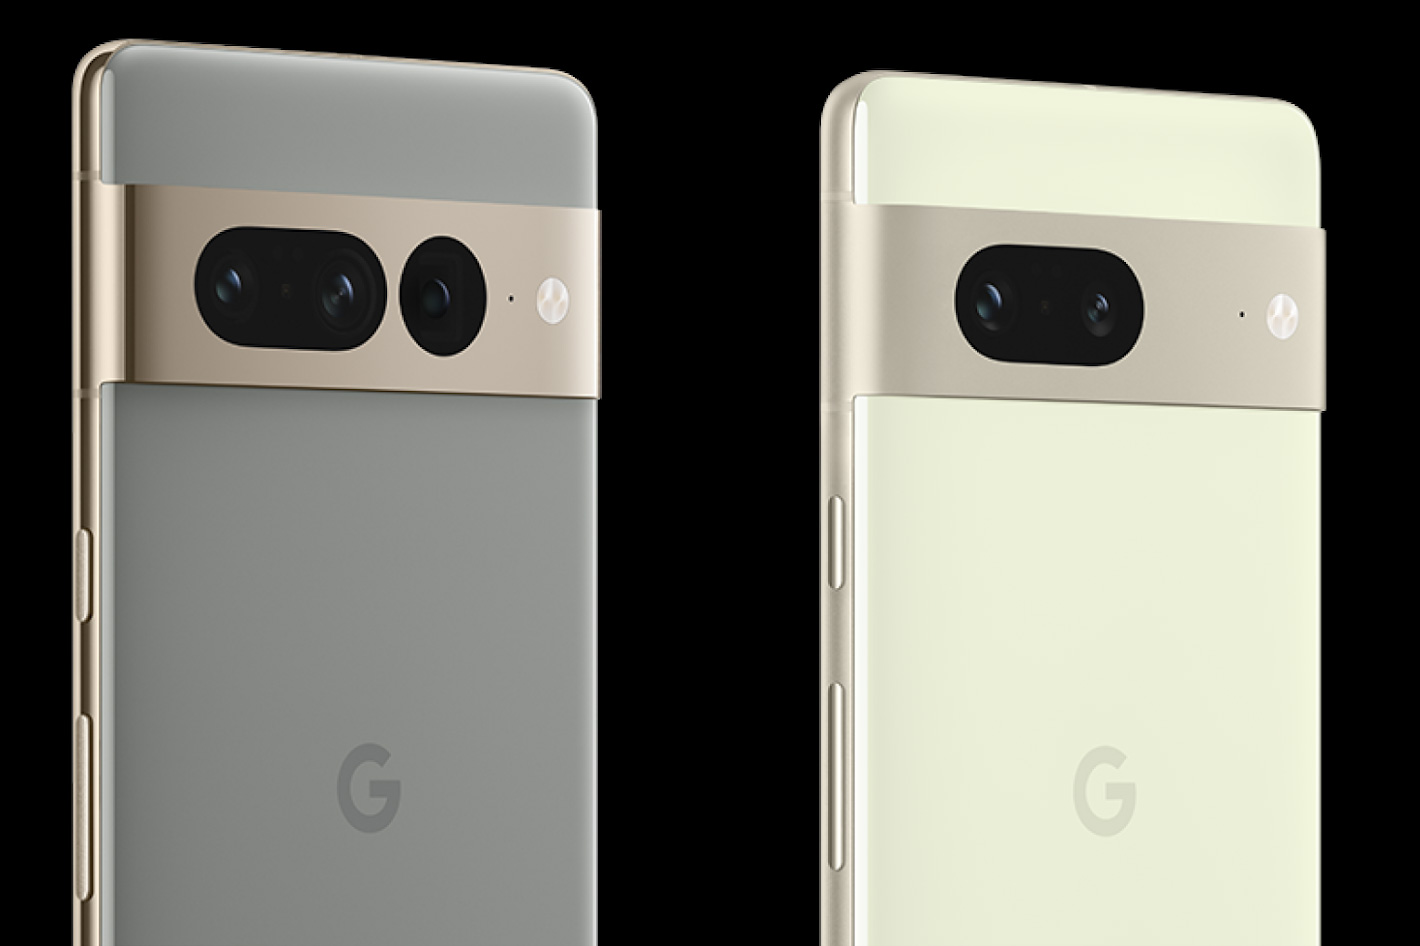 New Pixel 7 smartphones offer CinematicBlur and Photo Unblur